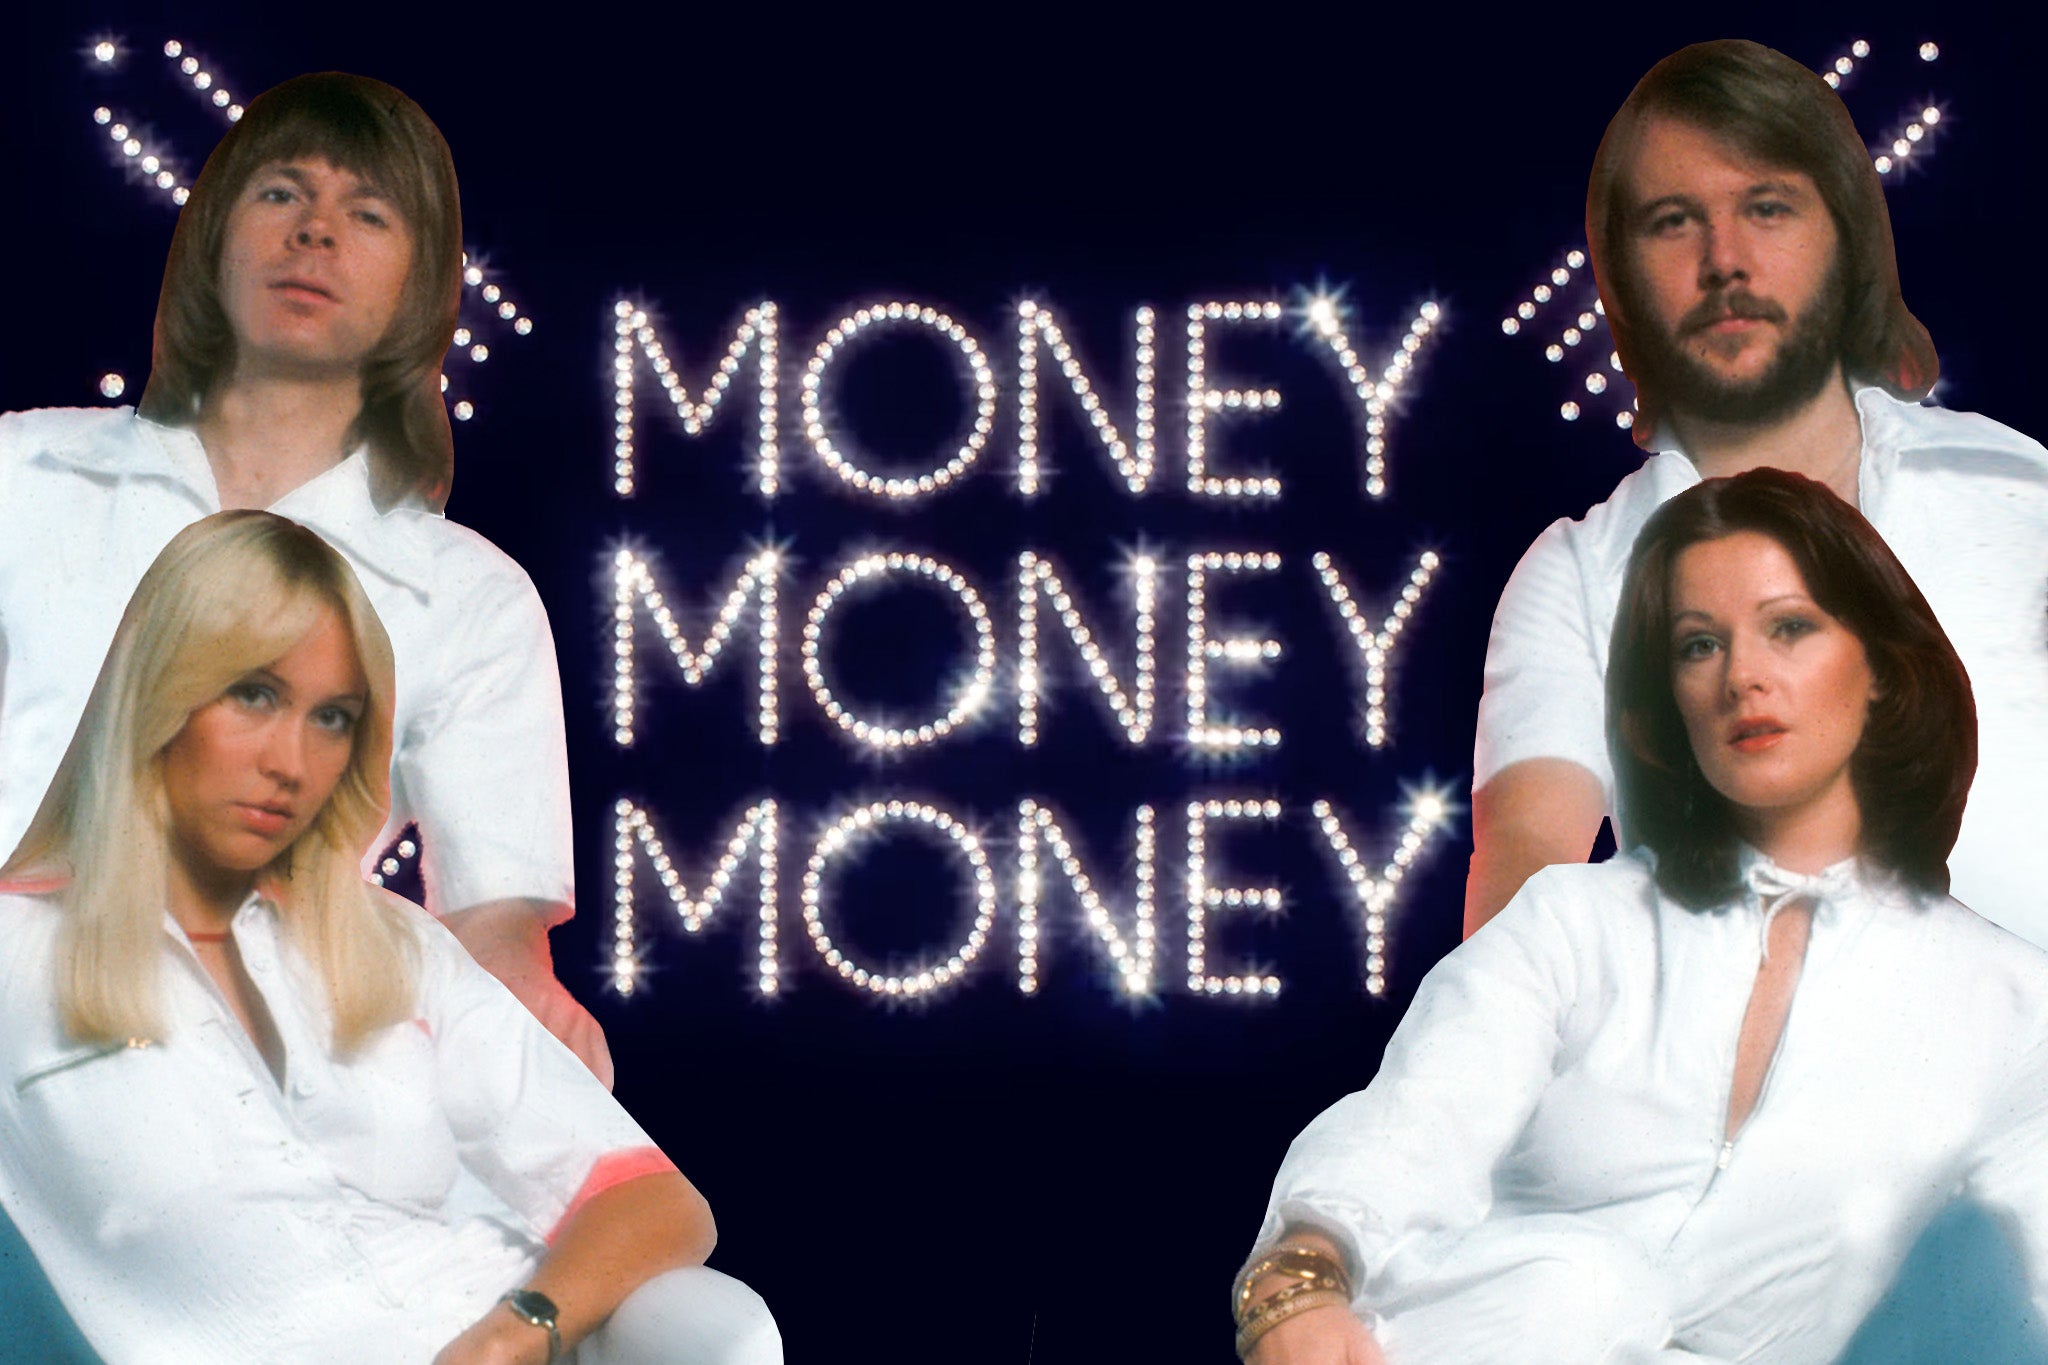 It’s a rich man’s world: turns out Abba were right on the money...